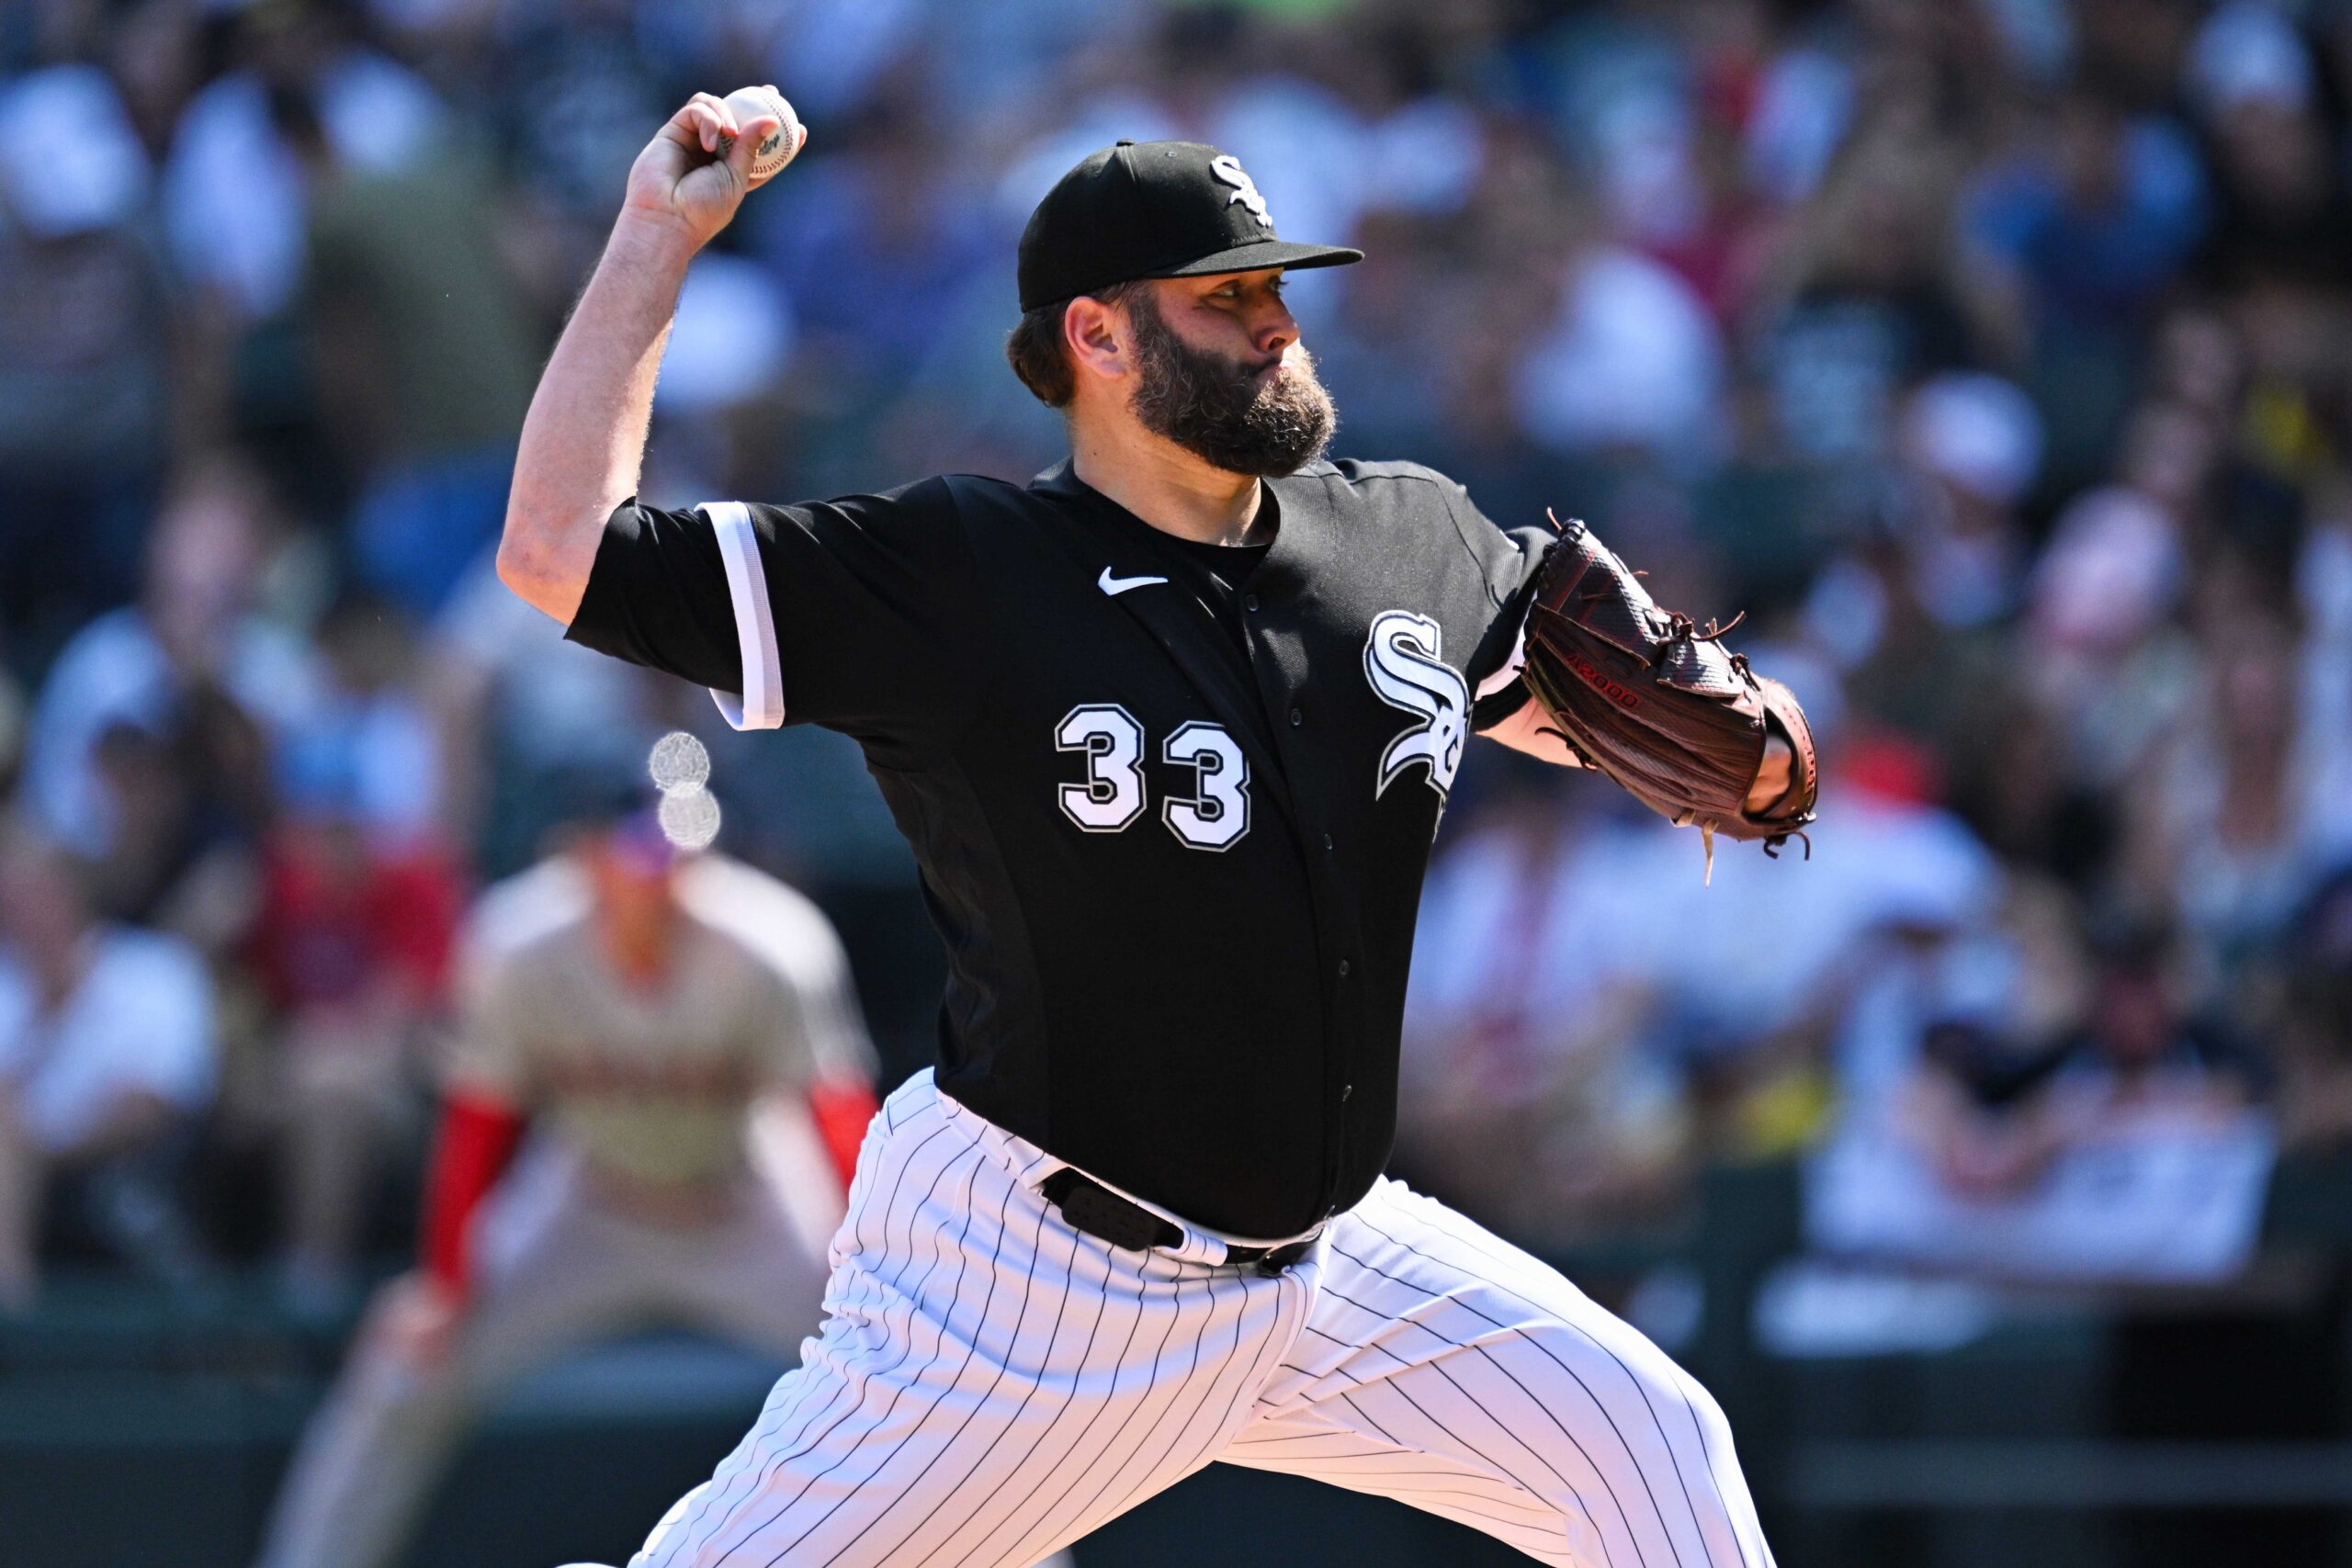 How the Lance Lynn trade impacts the Texas Rangers